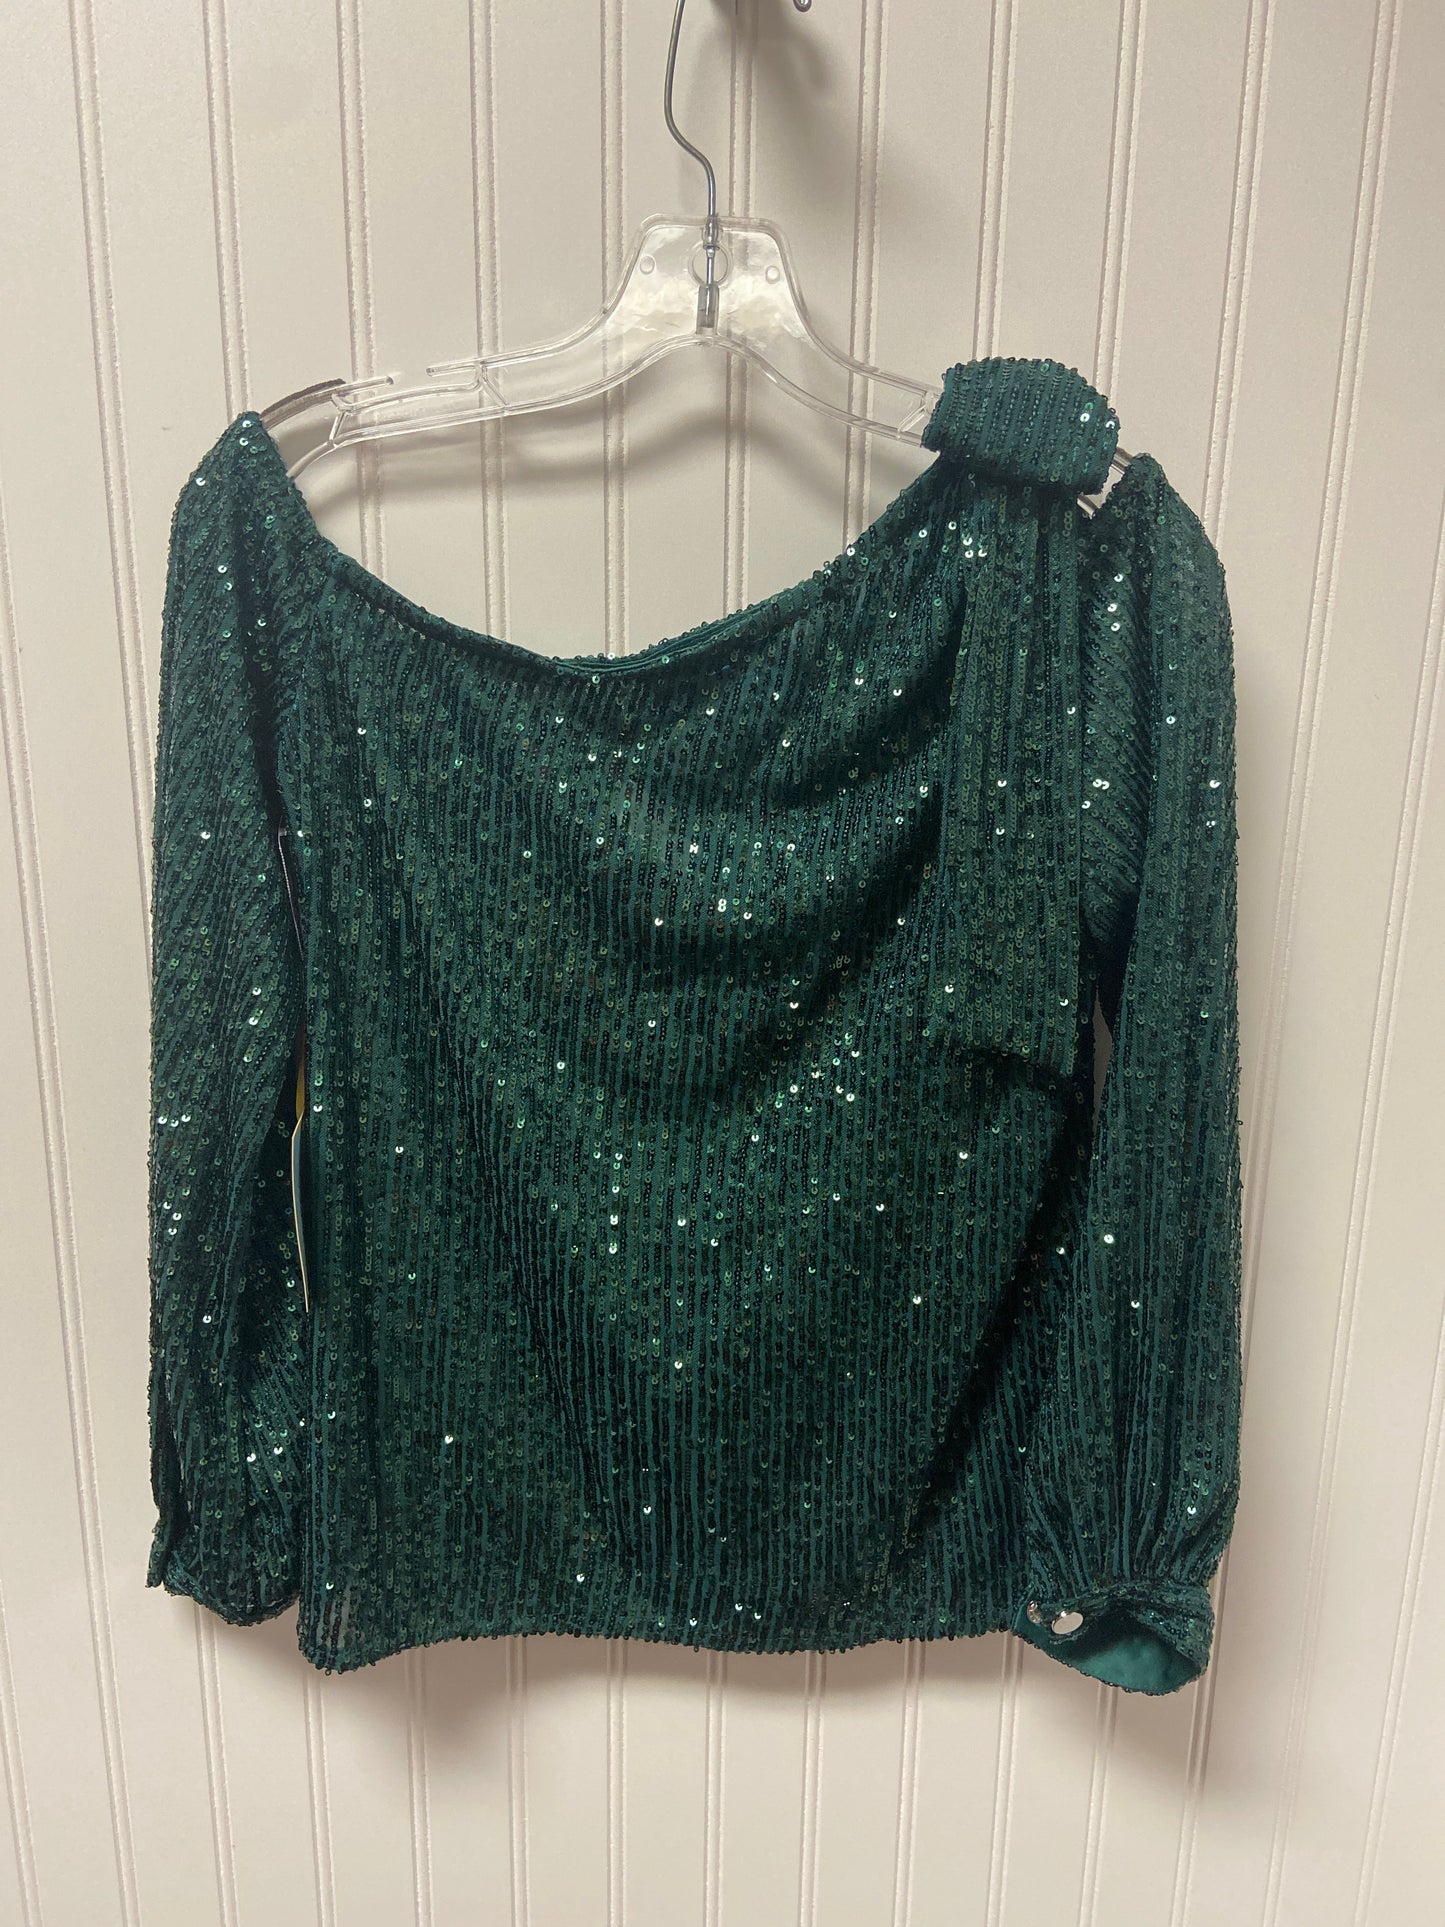 Green Top Long Sleeve Cece, Size S